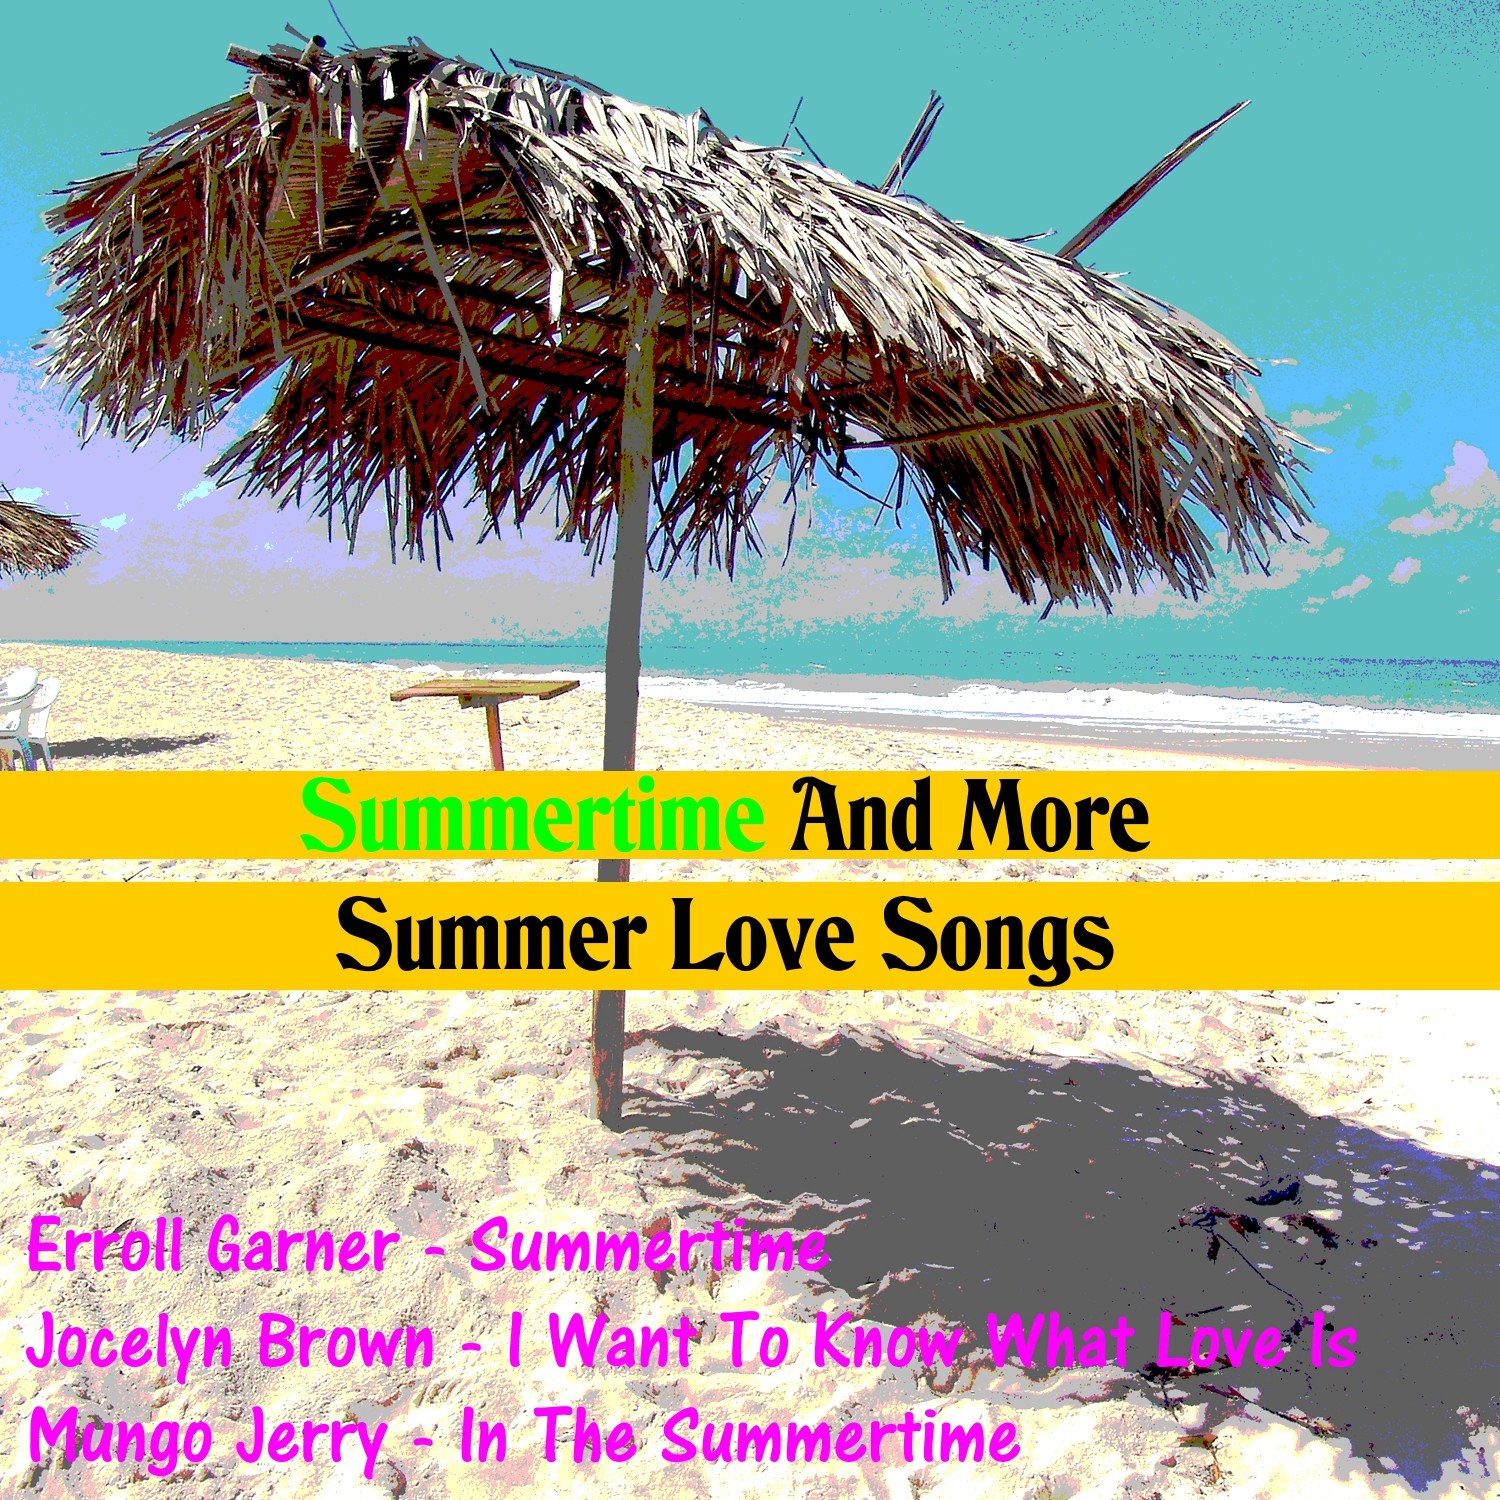 Summertime and More Summer Love Songs